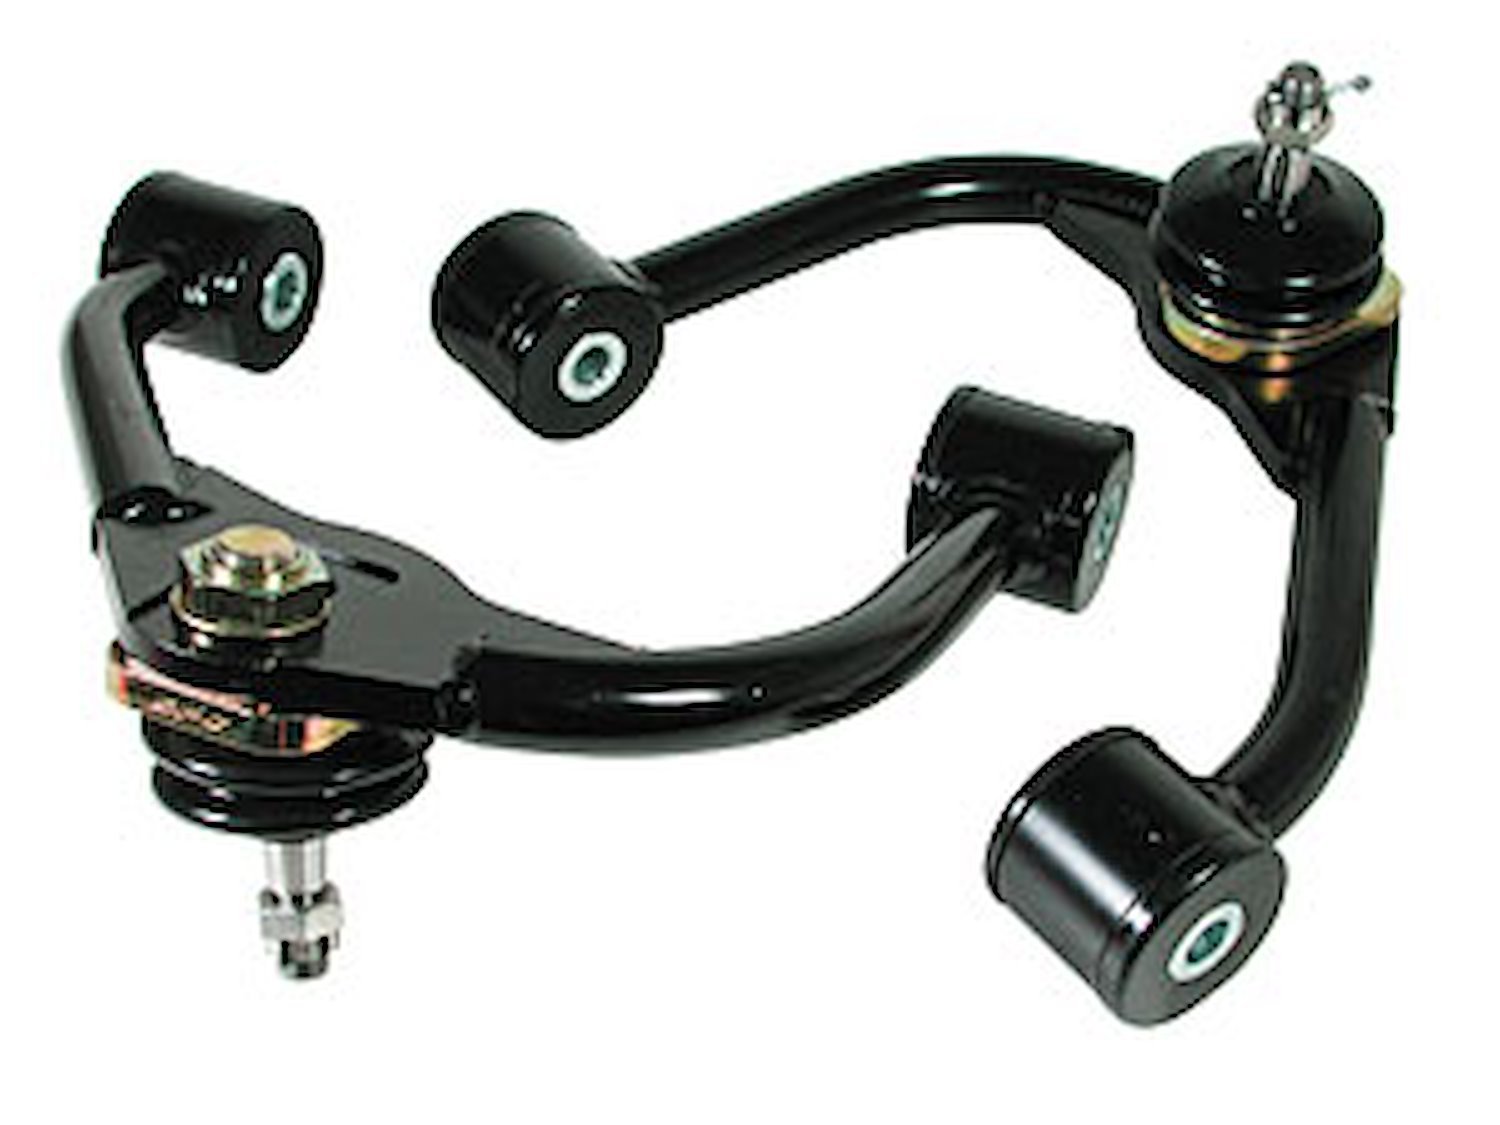 Adjustable Control Arms for 2006-2015 Frontier/Pathfinder/Xterra